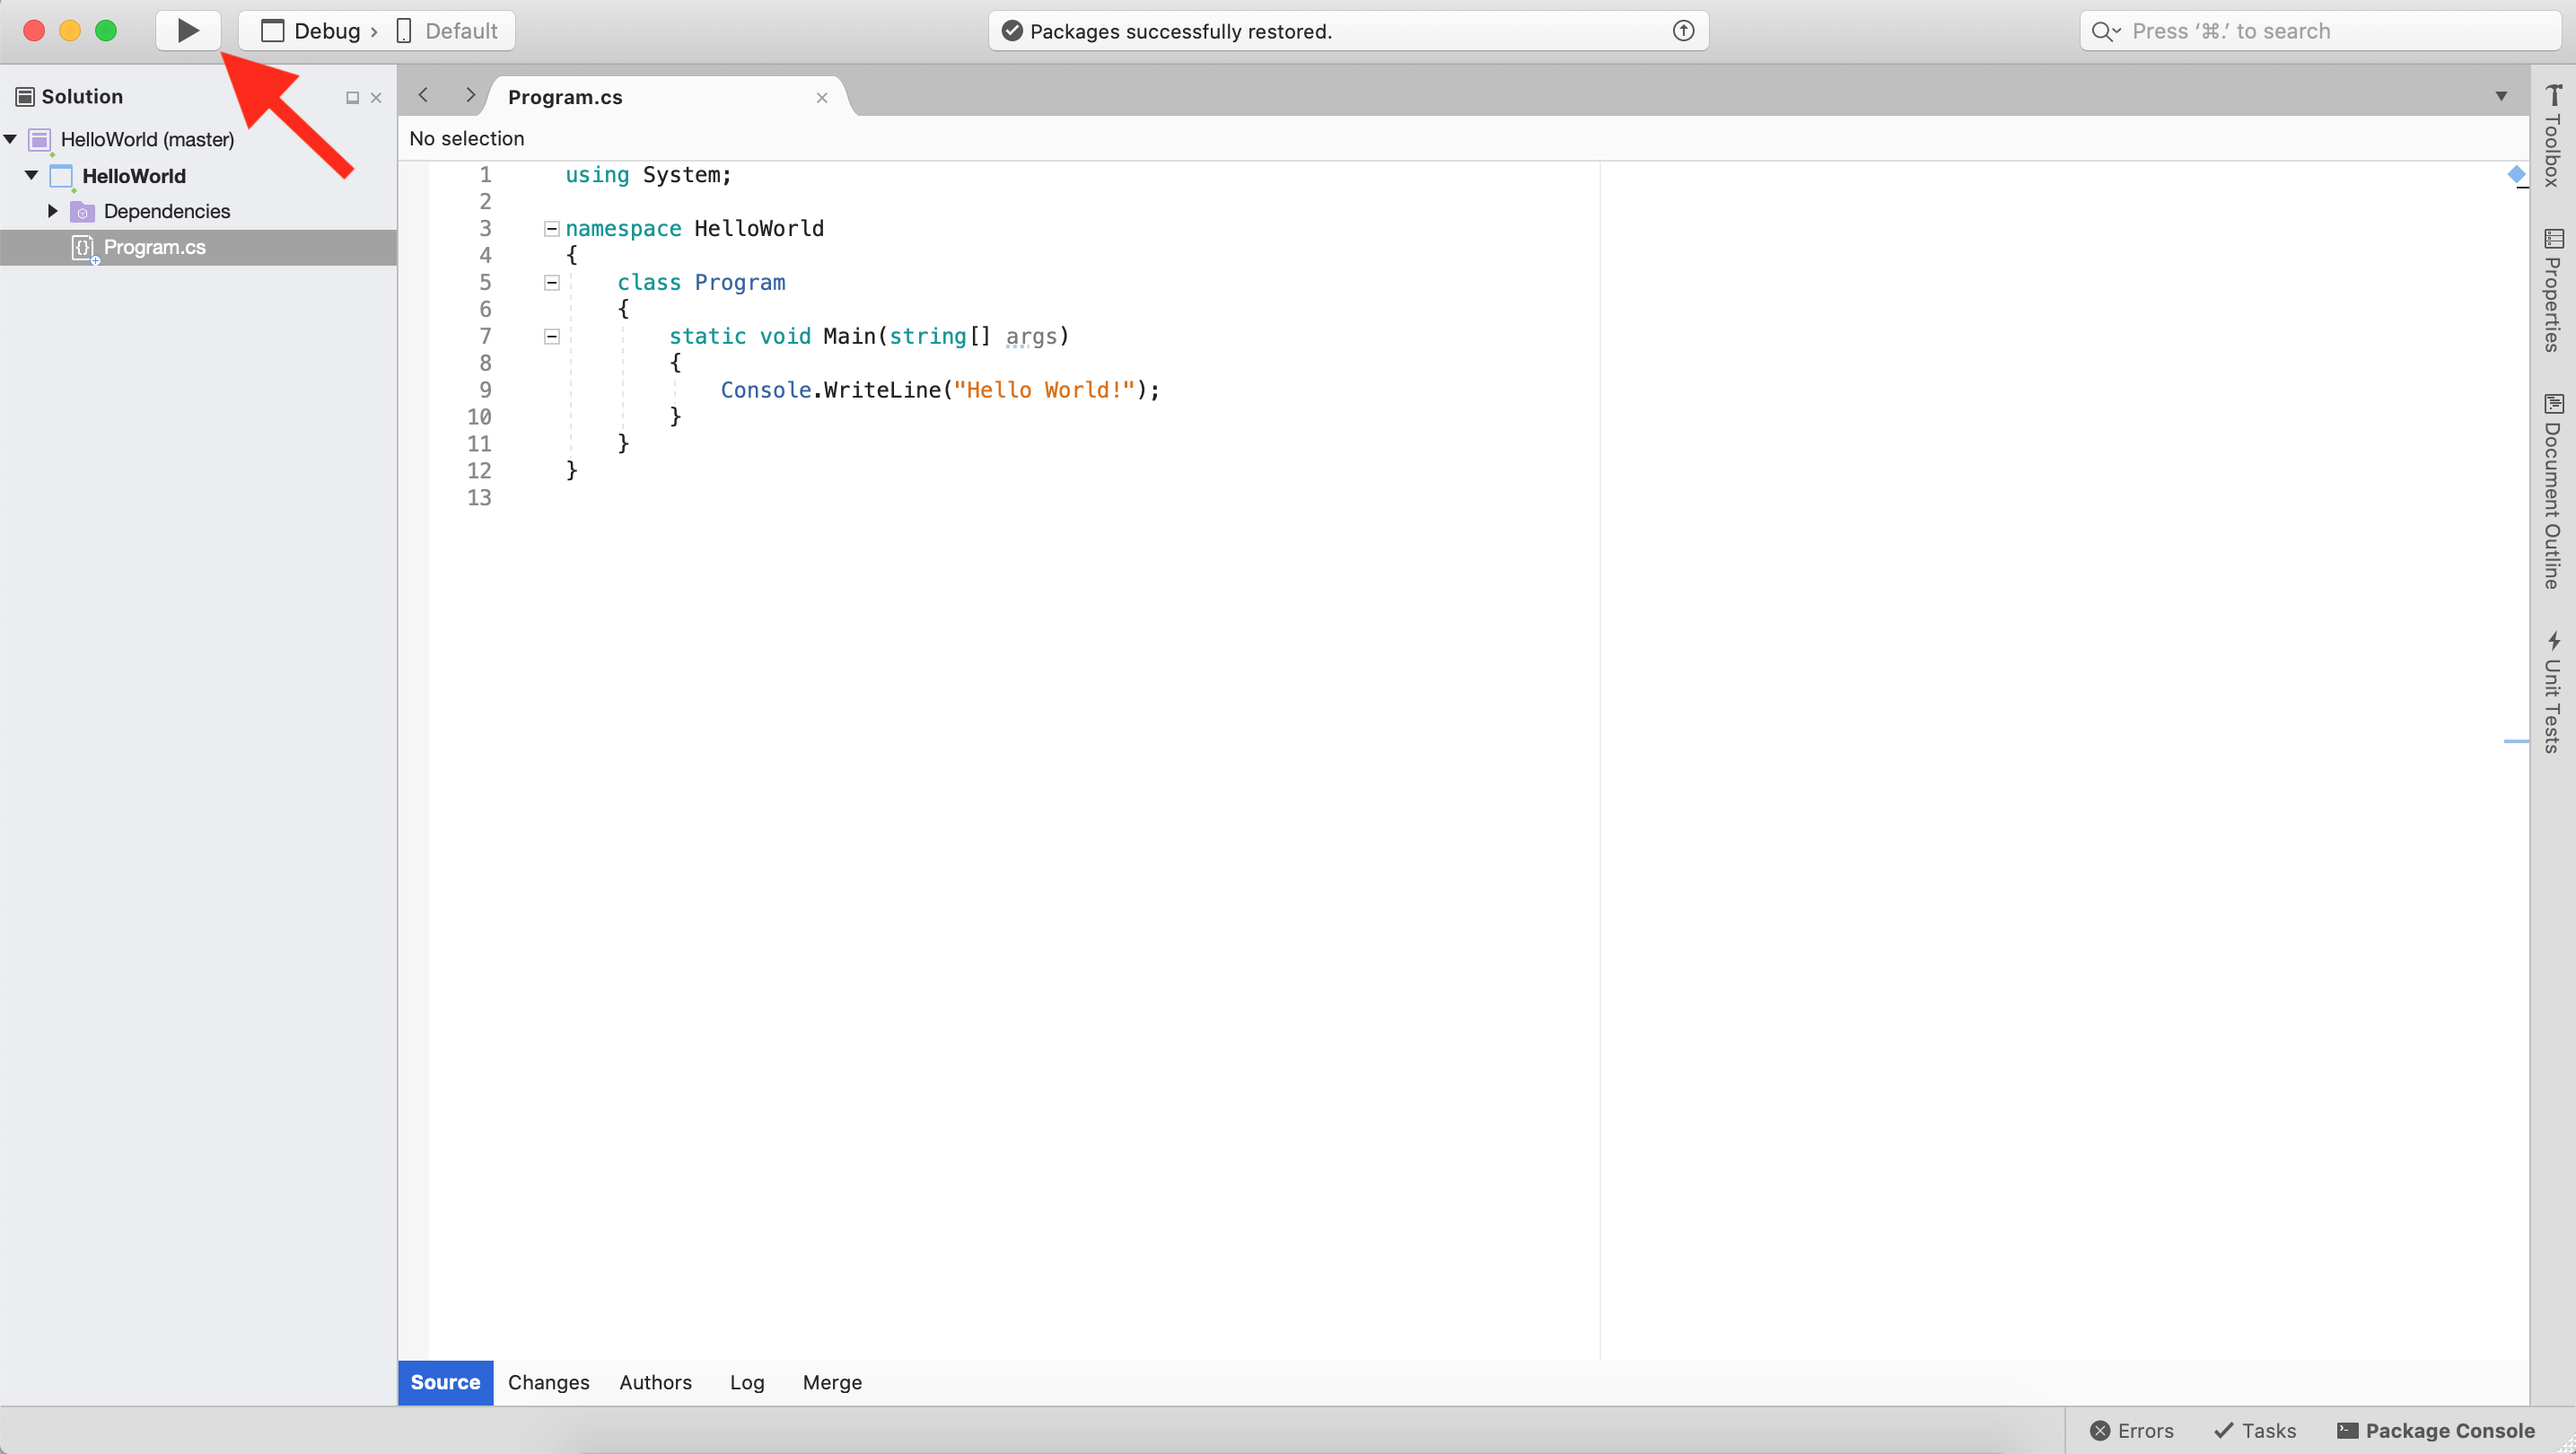 MAC: A new Visual Studio Project with run button indicated.